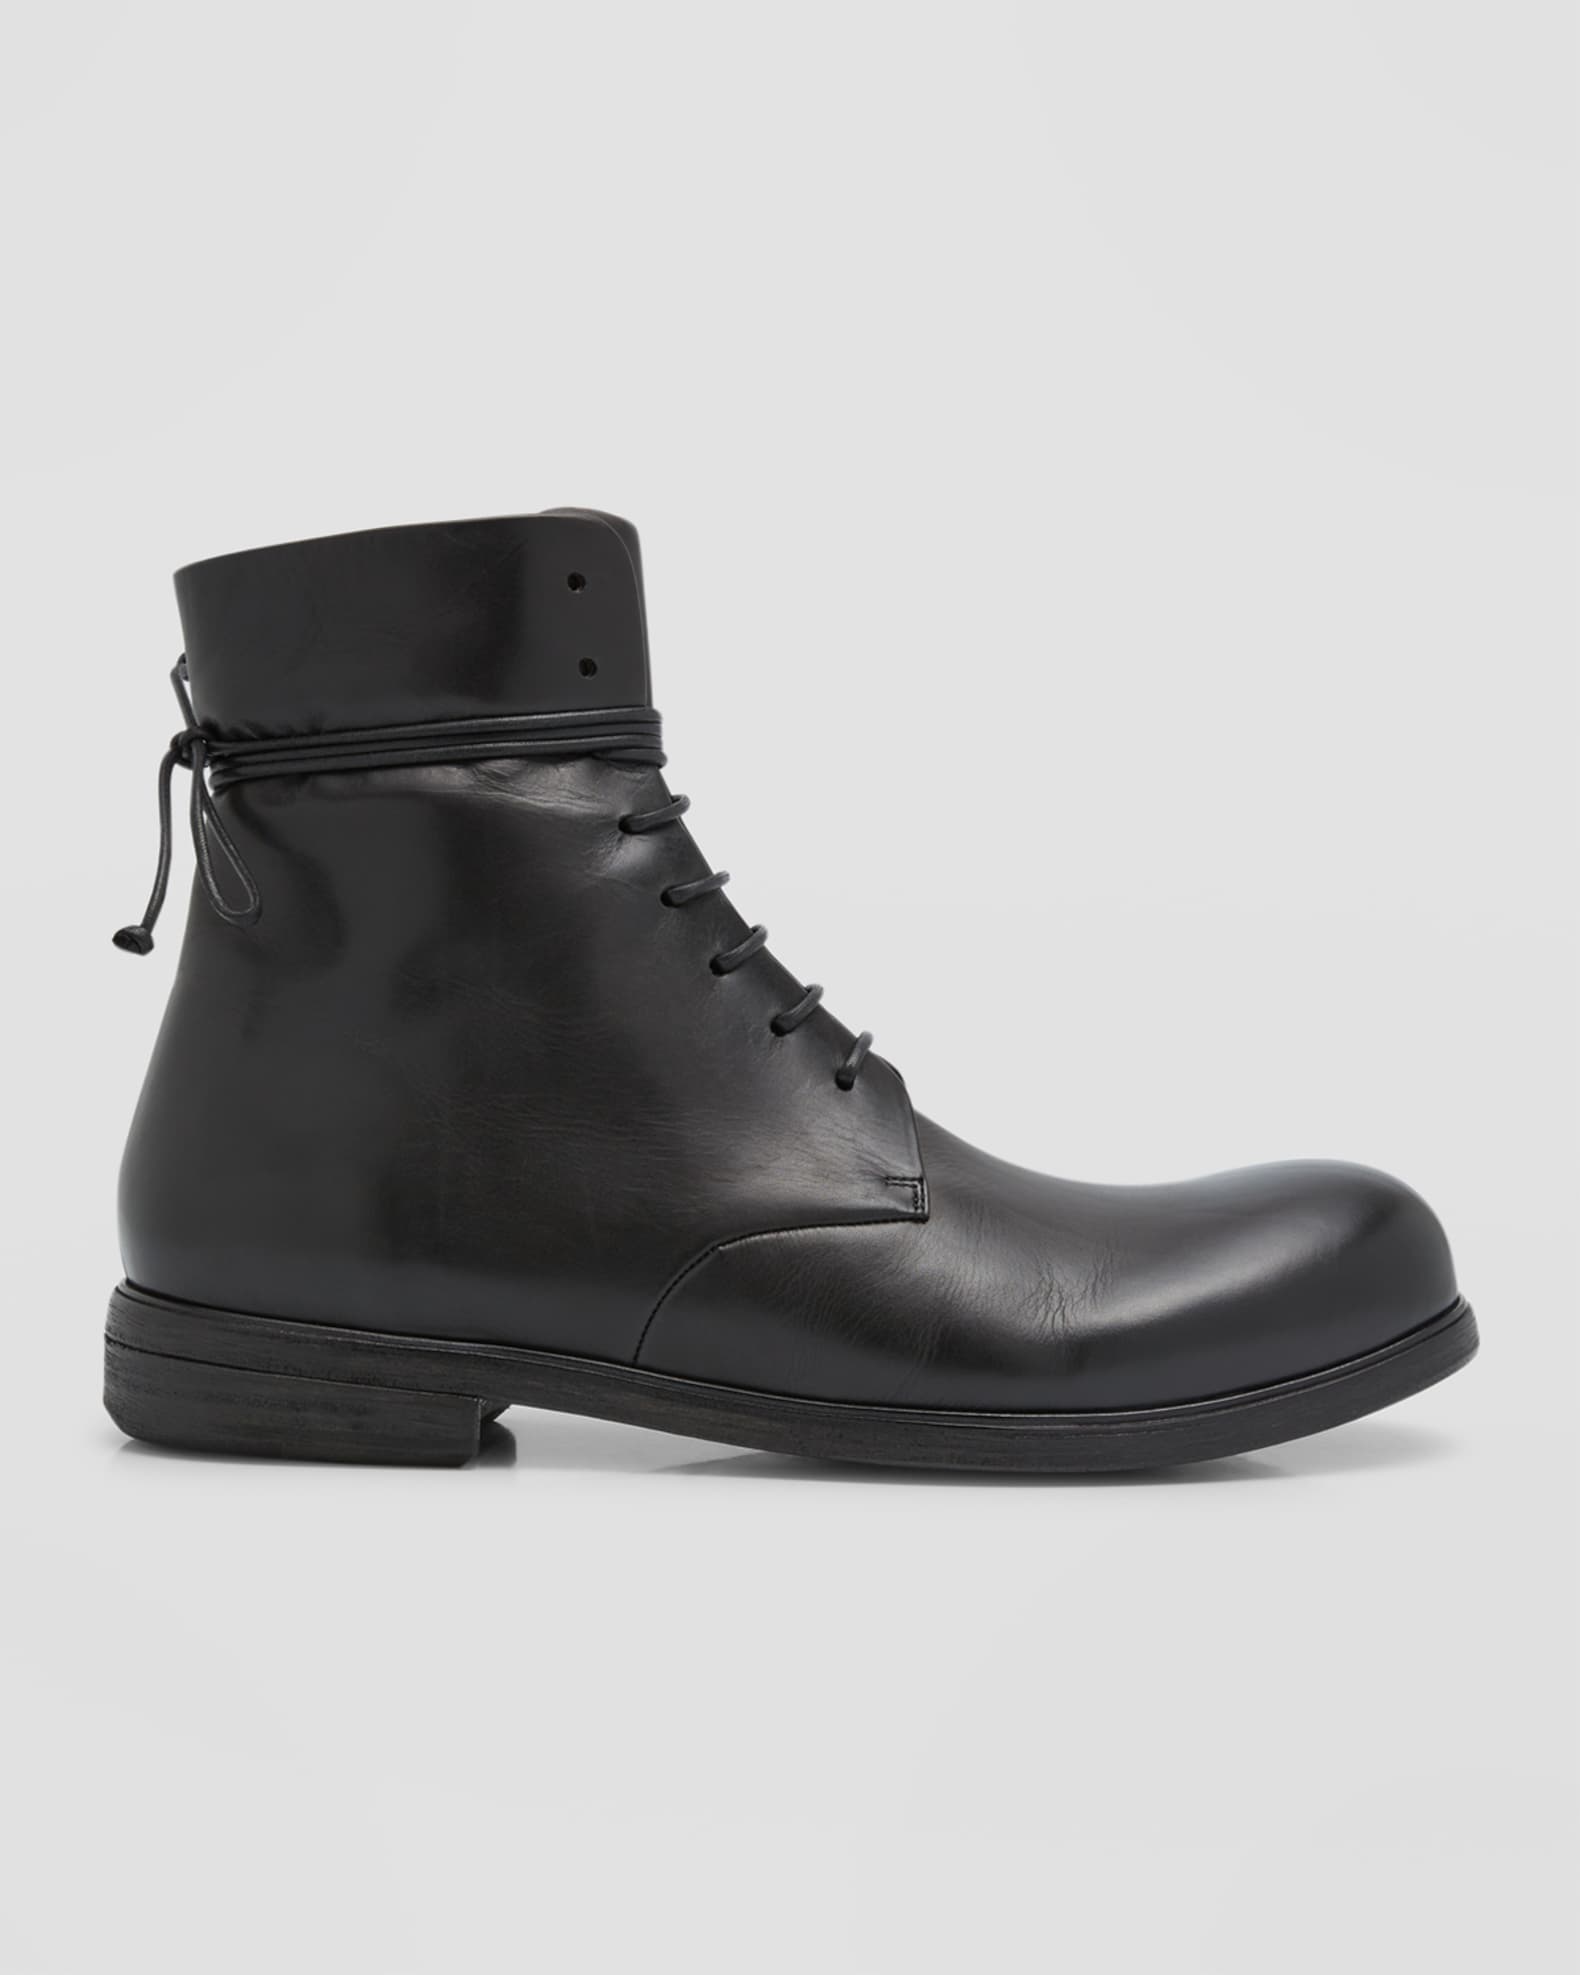 Marsell Men's Zucca Media Lace-Up Leather Boots | Neiman Marcus